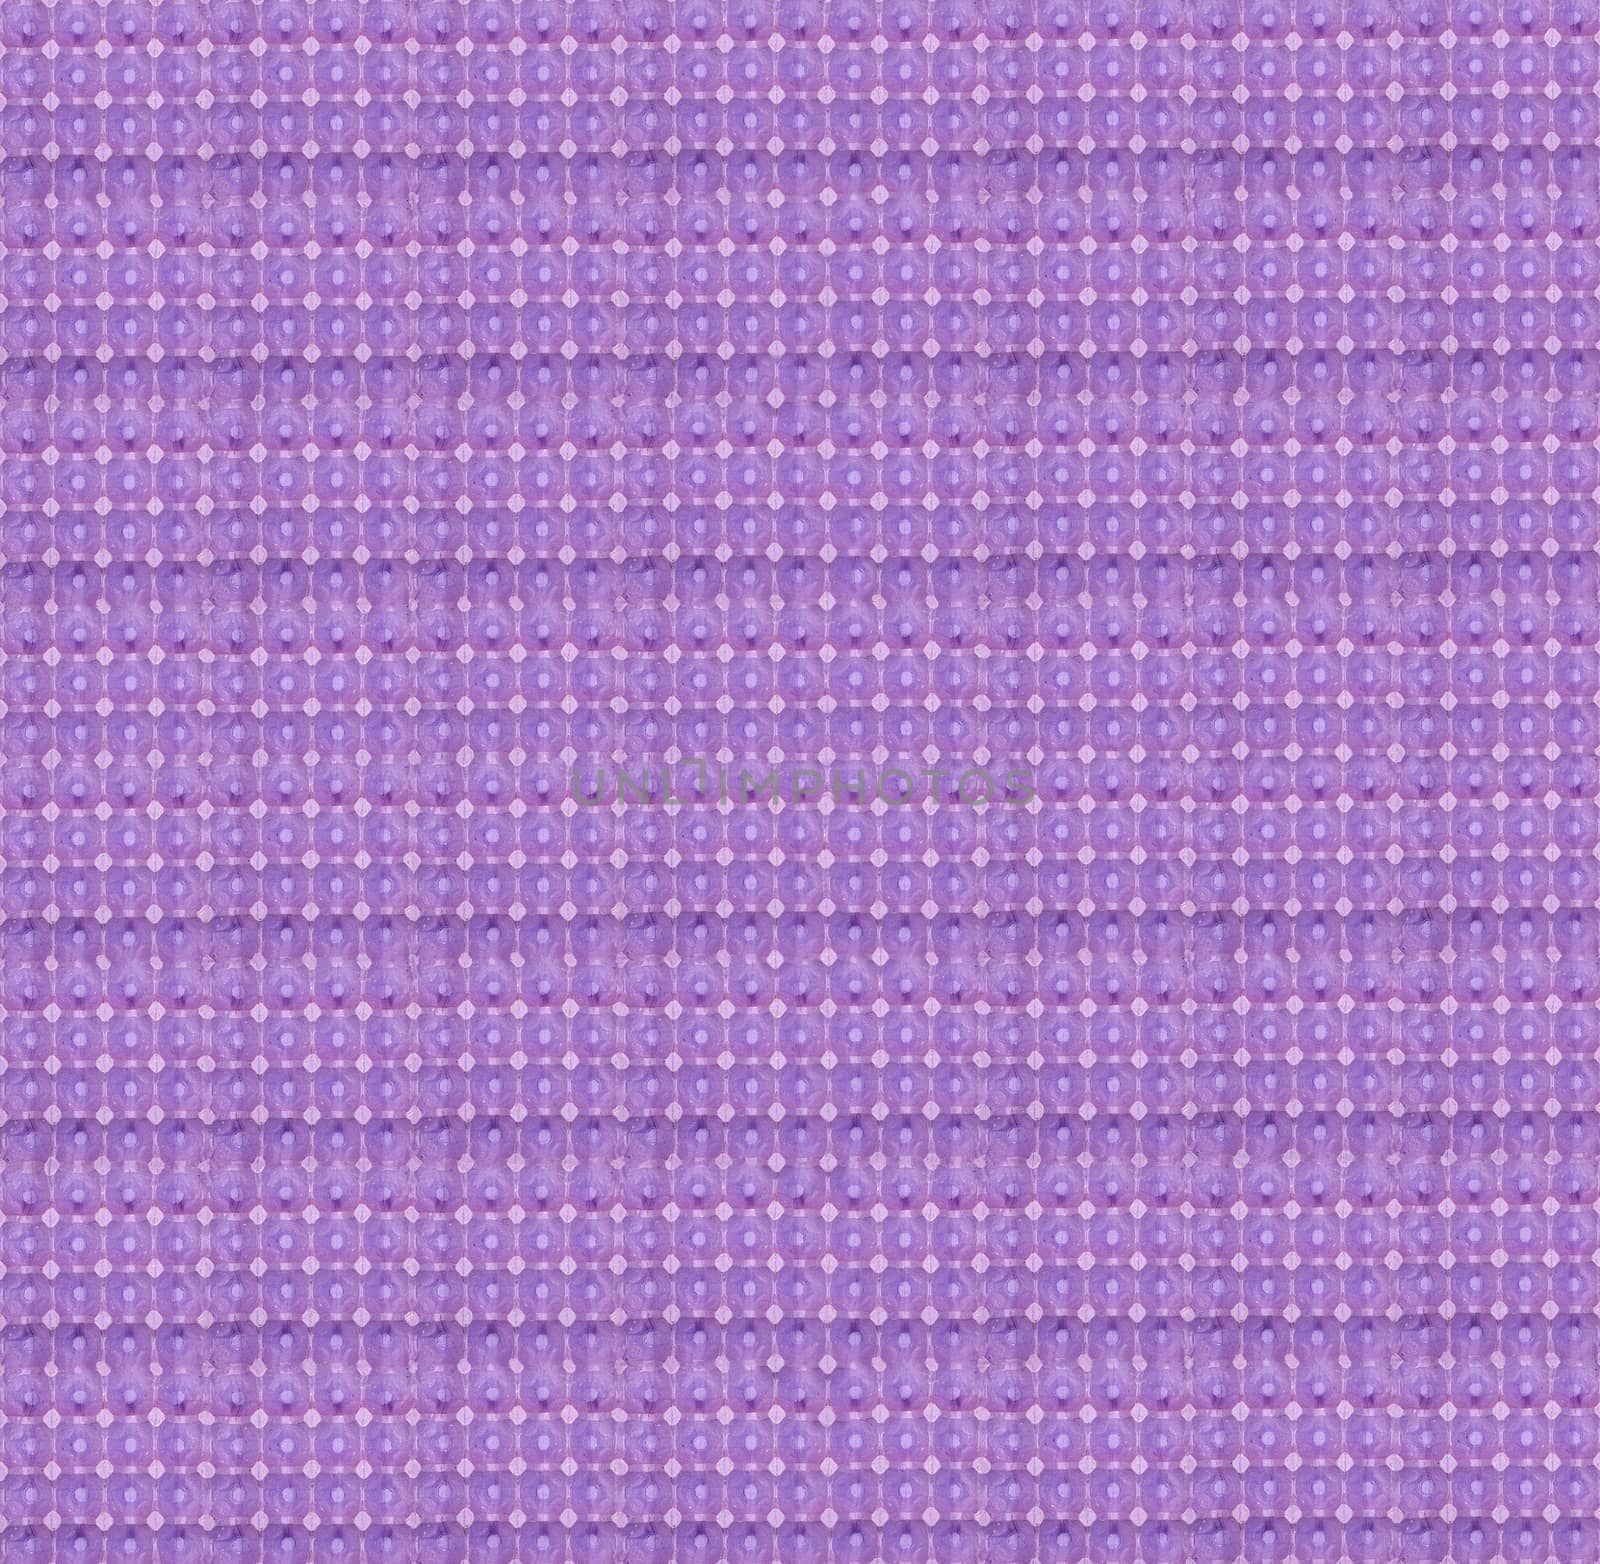 Abstract purple background as tiles of the cells